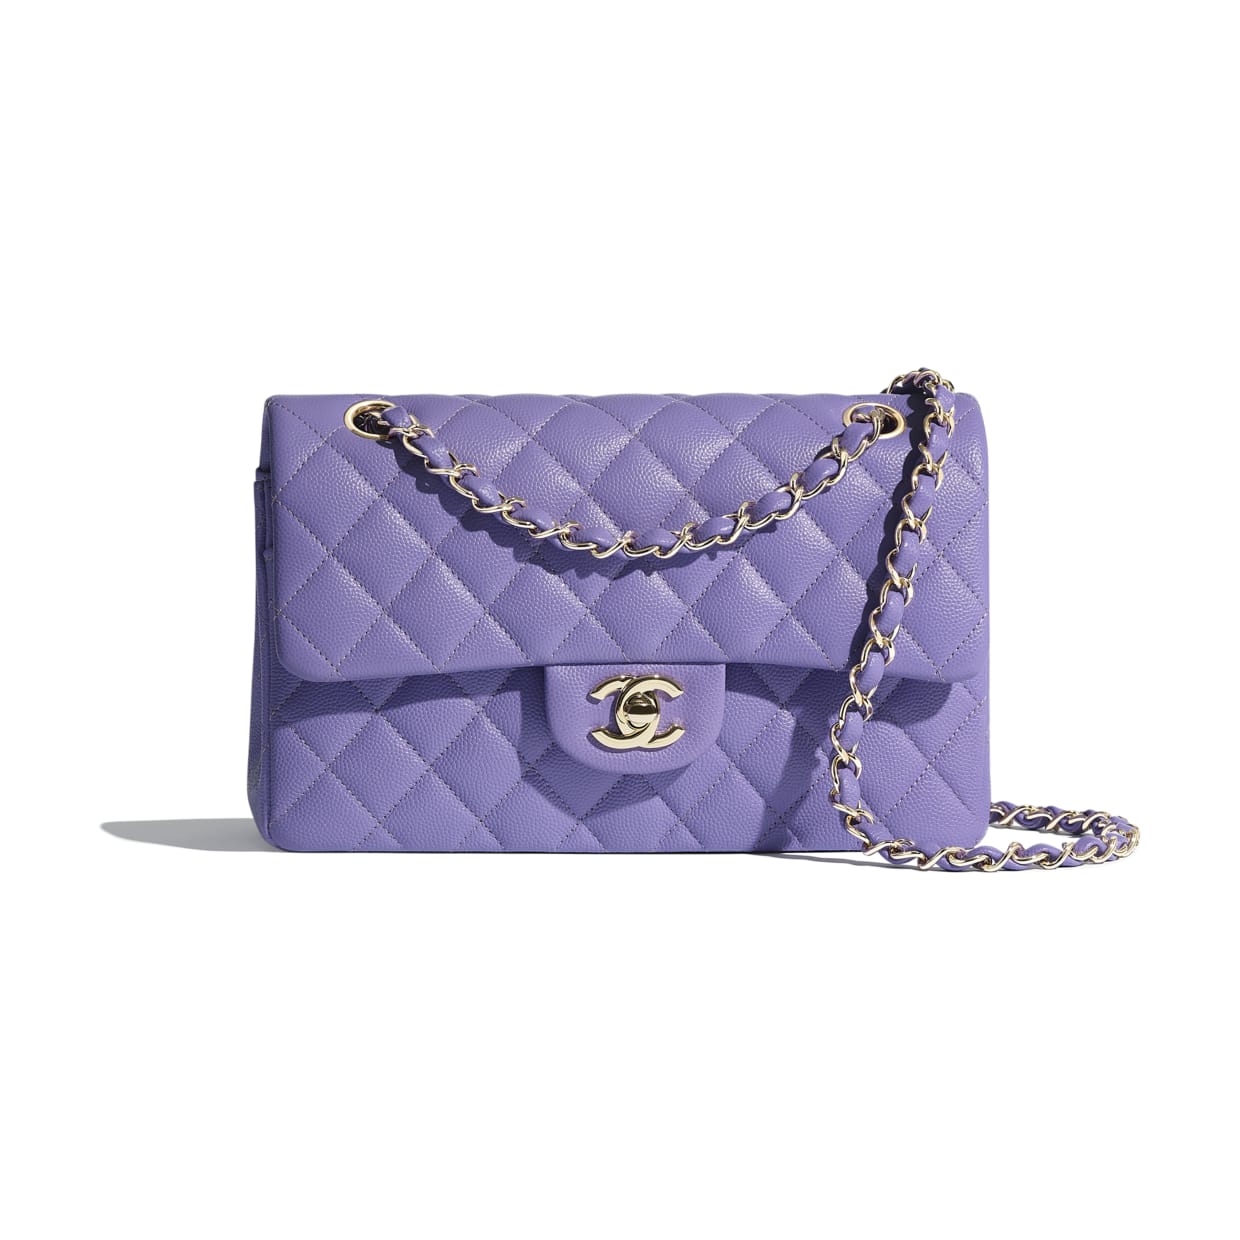 Canada Chanel Bag List Reference Guide - Spotted Fashion